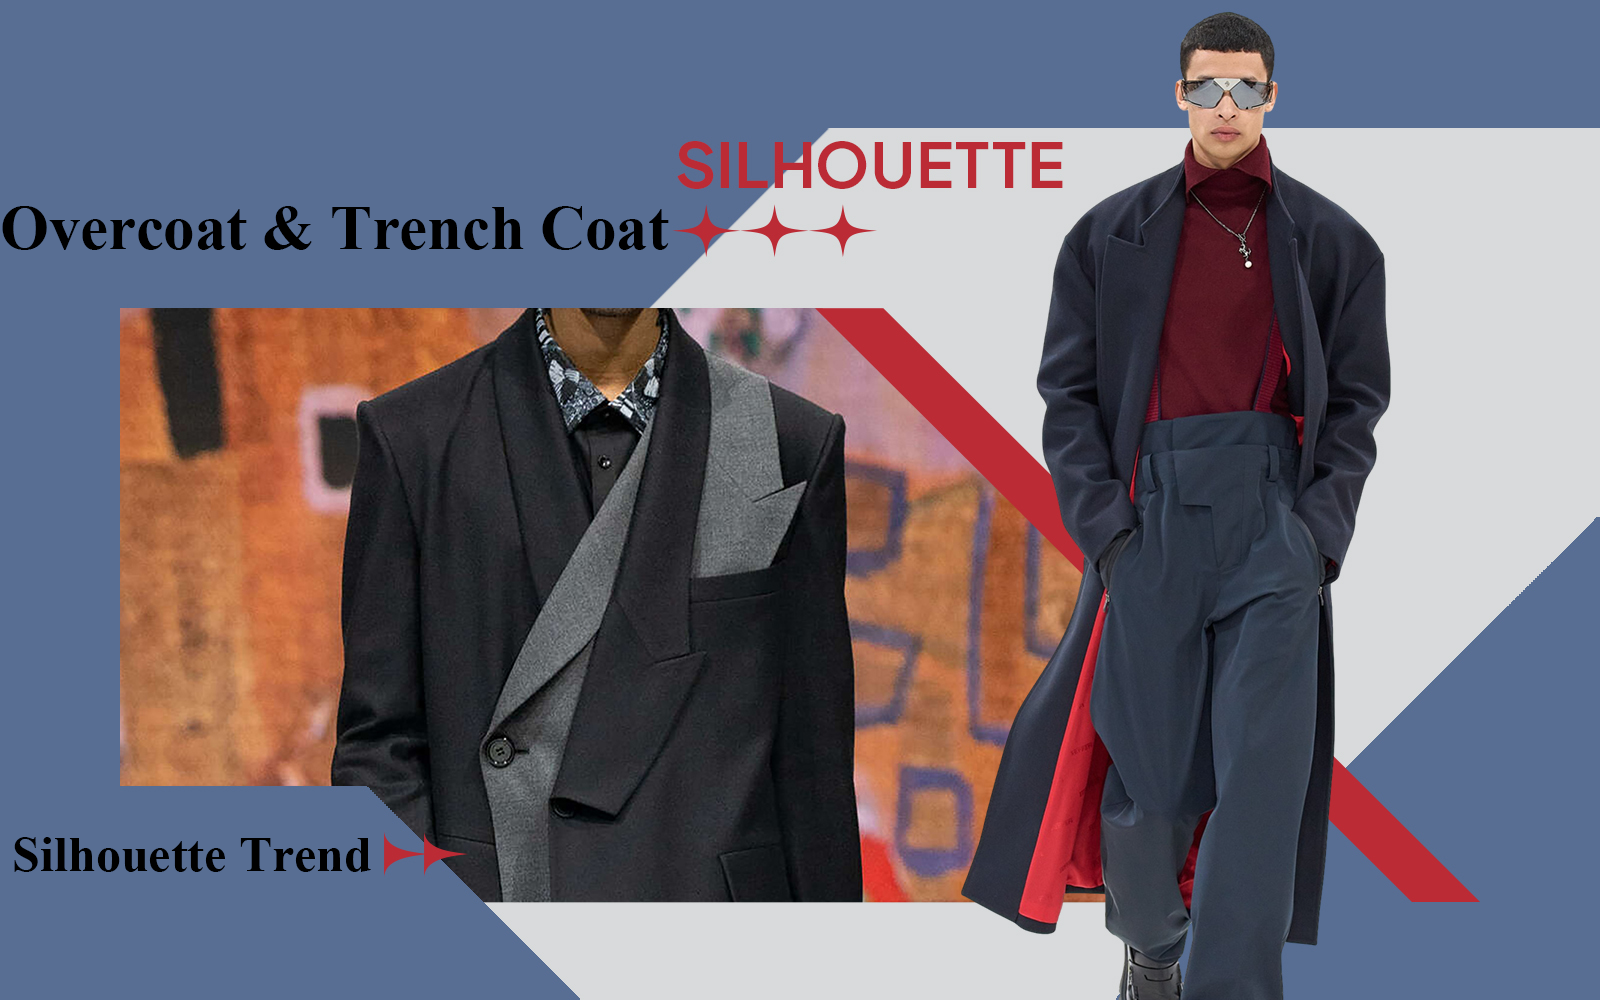 Fashion Commuting -- The Silhouette Trend for Men's Overcoat & Trench Coat